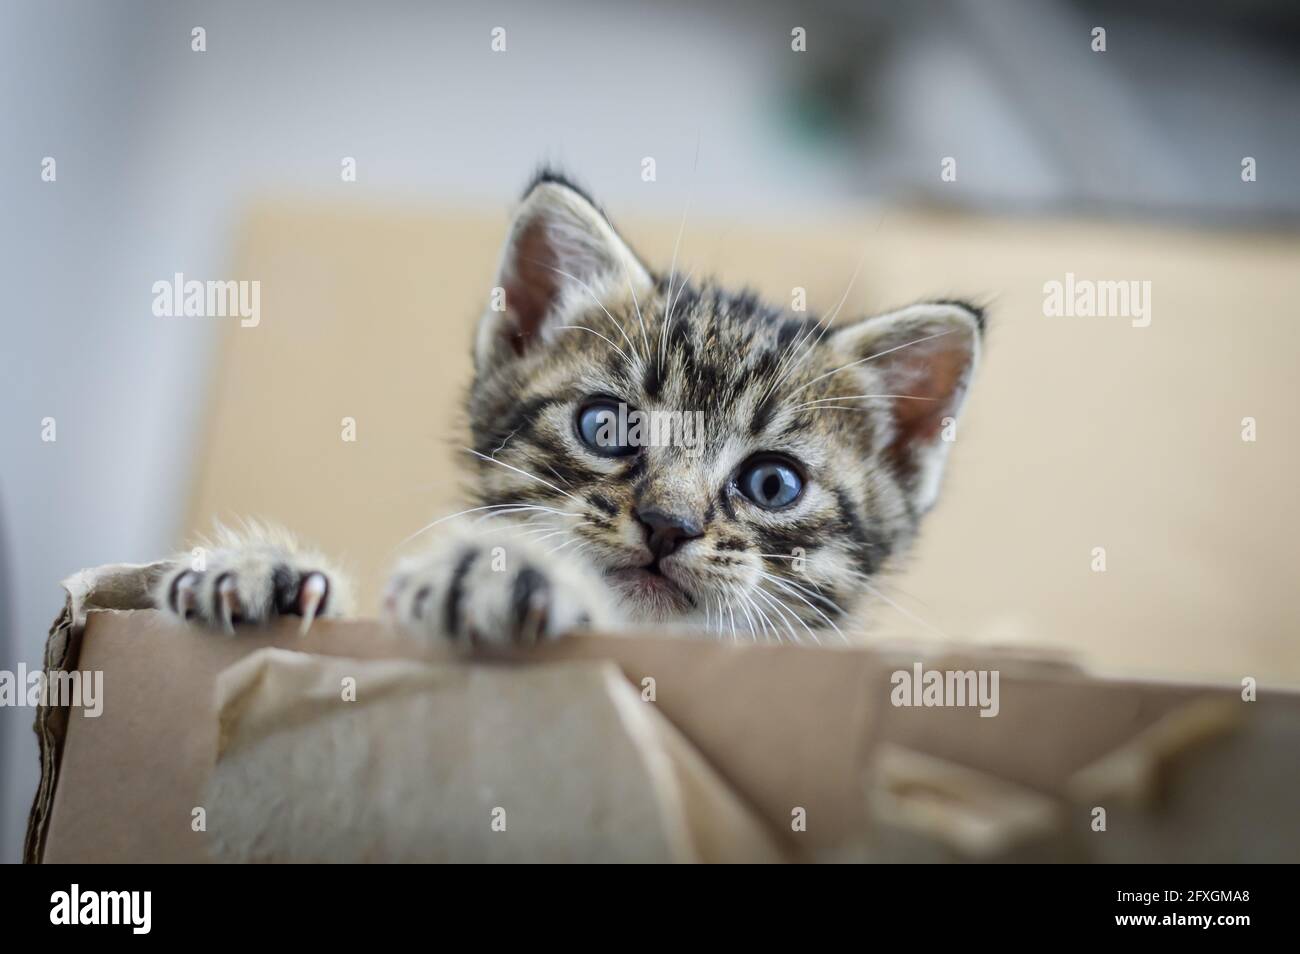 portrait of a one month old striped kitten popping out with the head from the box, shallow depth focus Stock Photo